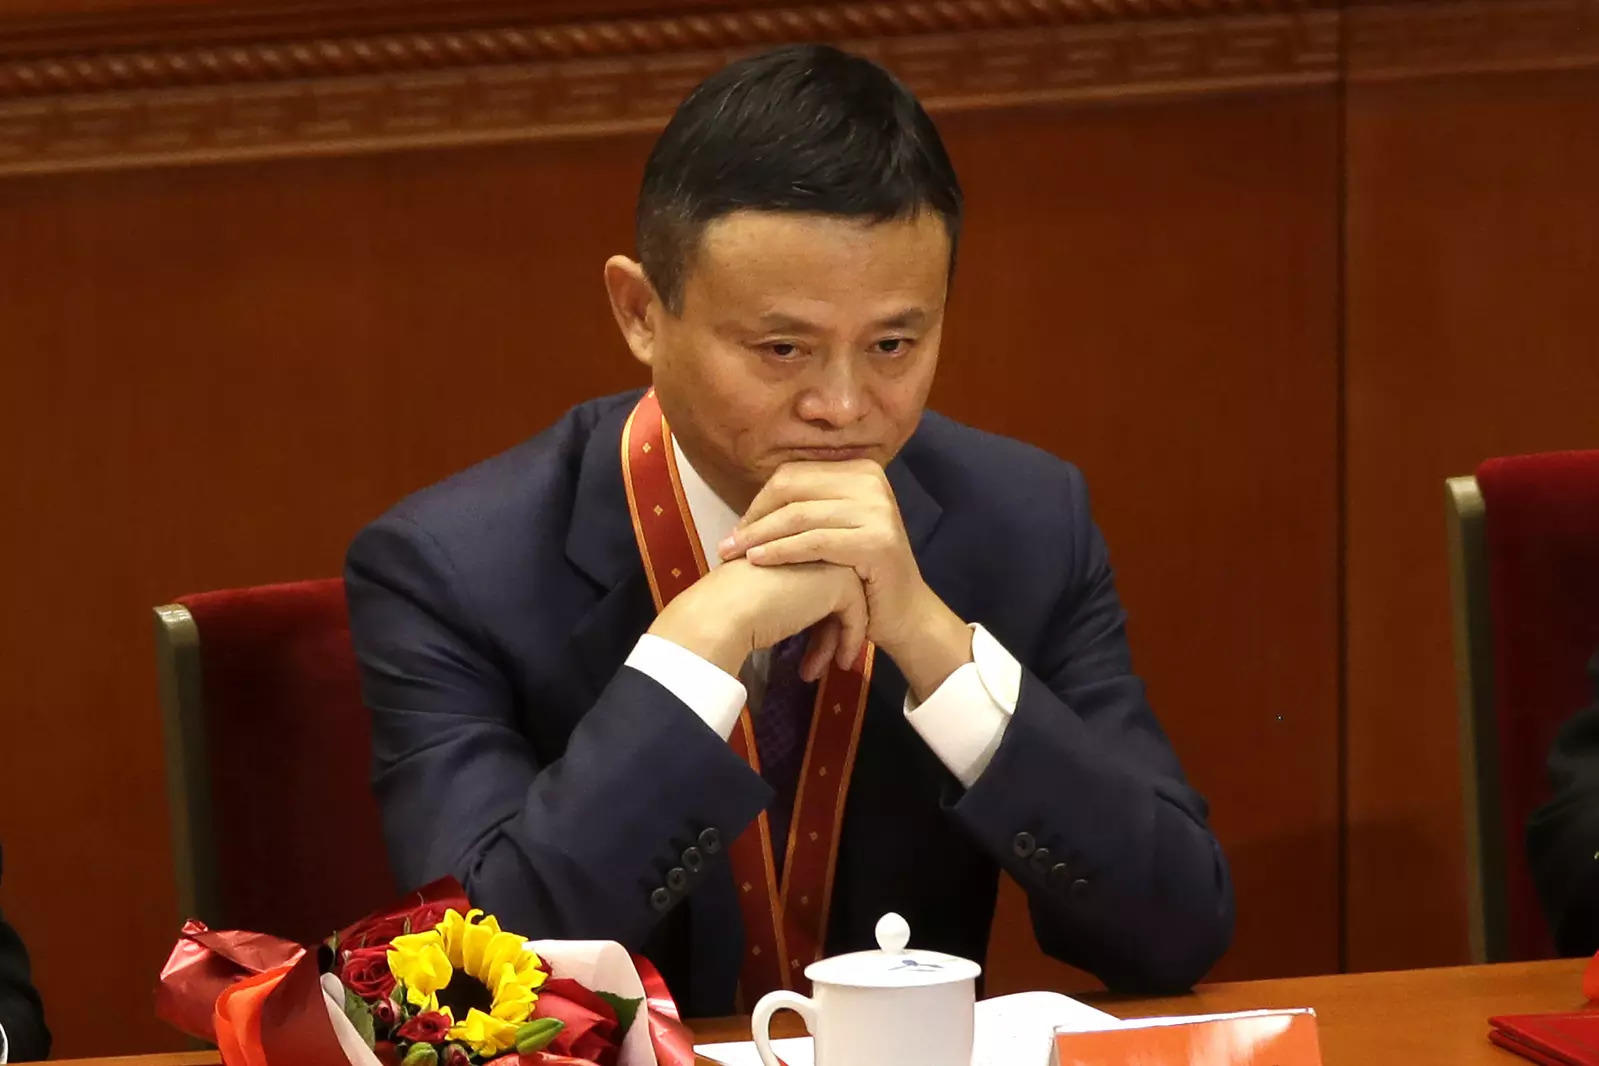 File photo: Jack Ma holds no management titles at Ant and giving up control of the company would cause little disruption for daily operations because he hasn't been deeply involved for years.